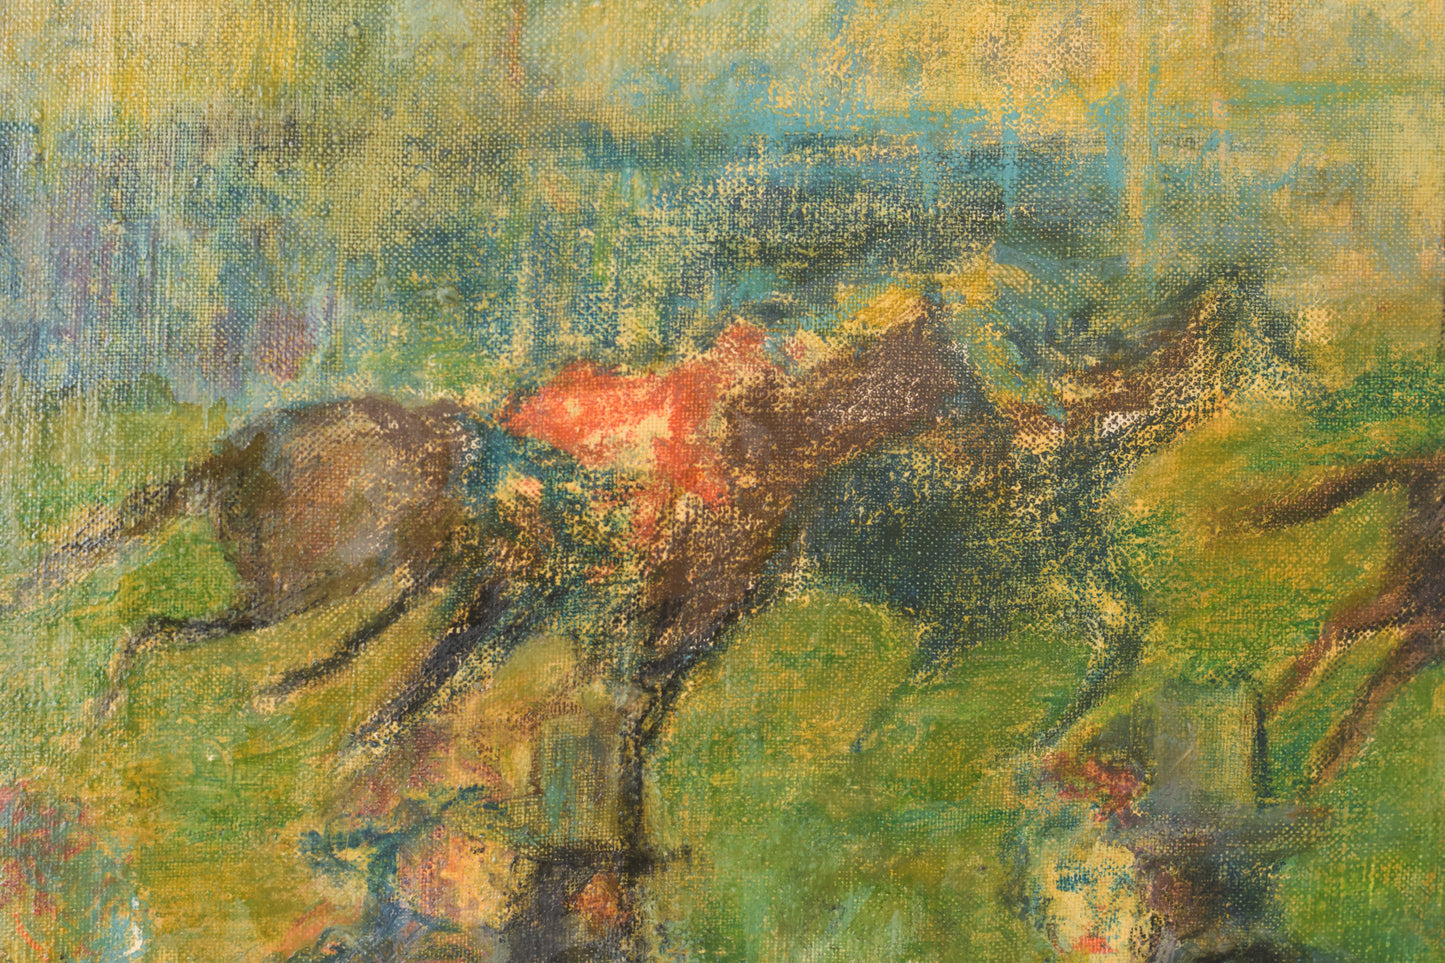 Impressionist Painting - 'A Day at the Races'